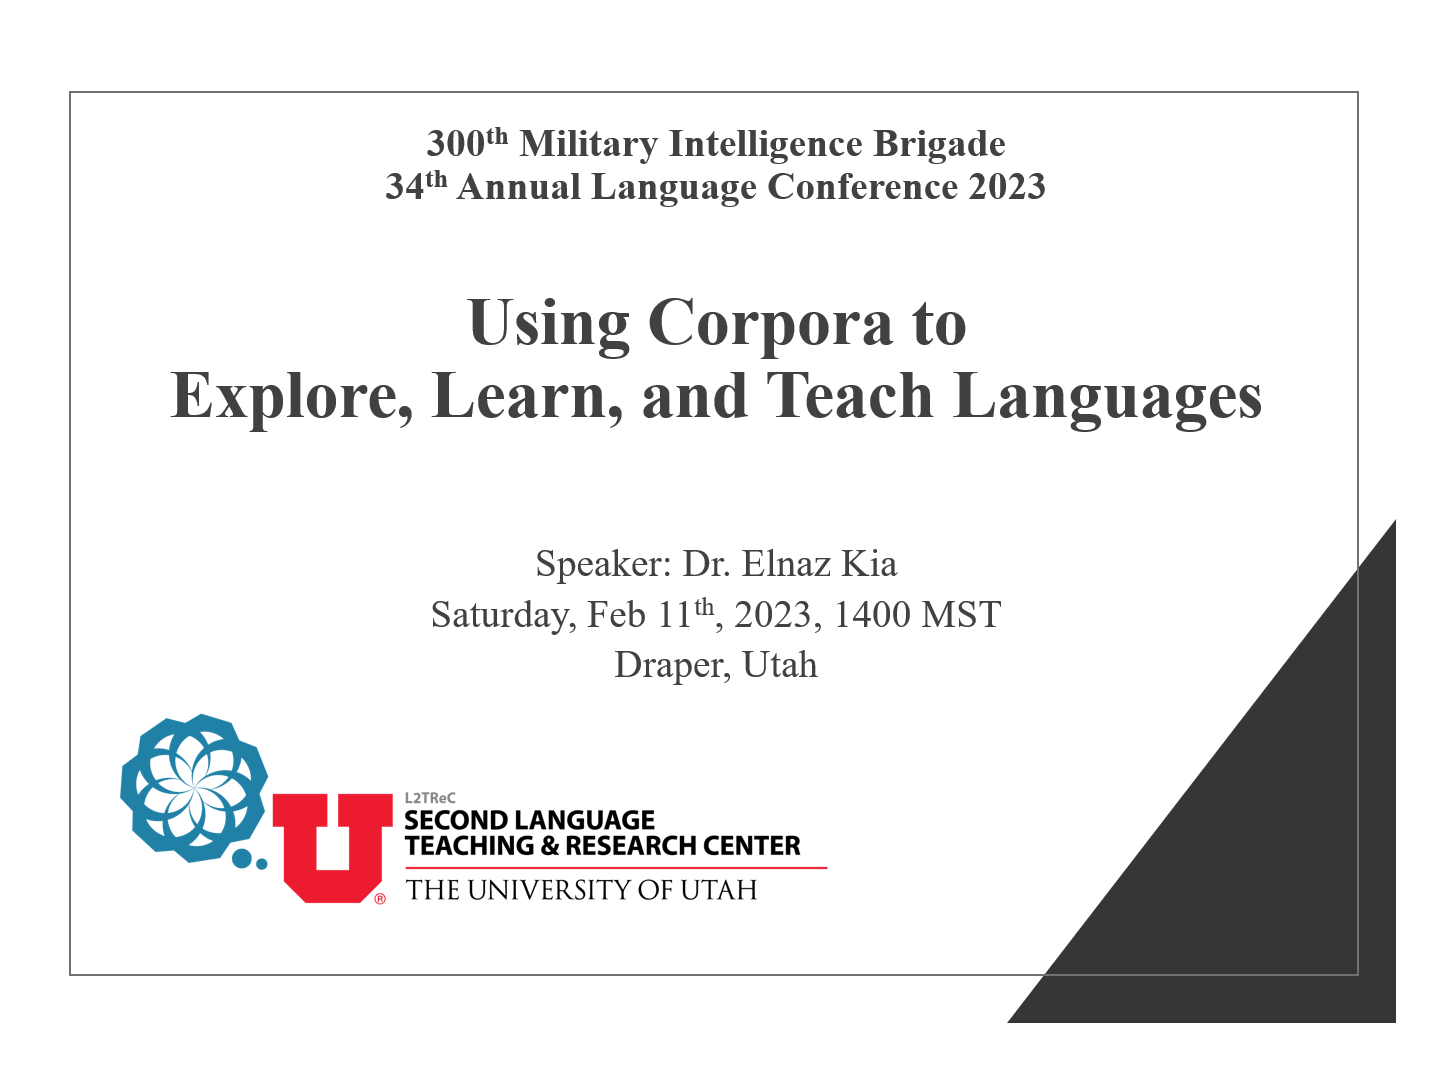 Using Corpora to Explore, Learn, & Teach Languages